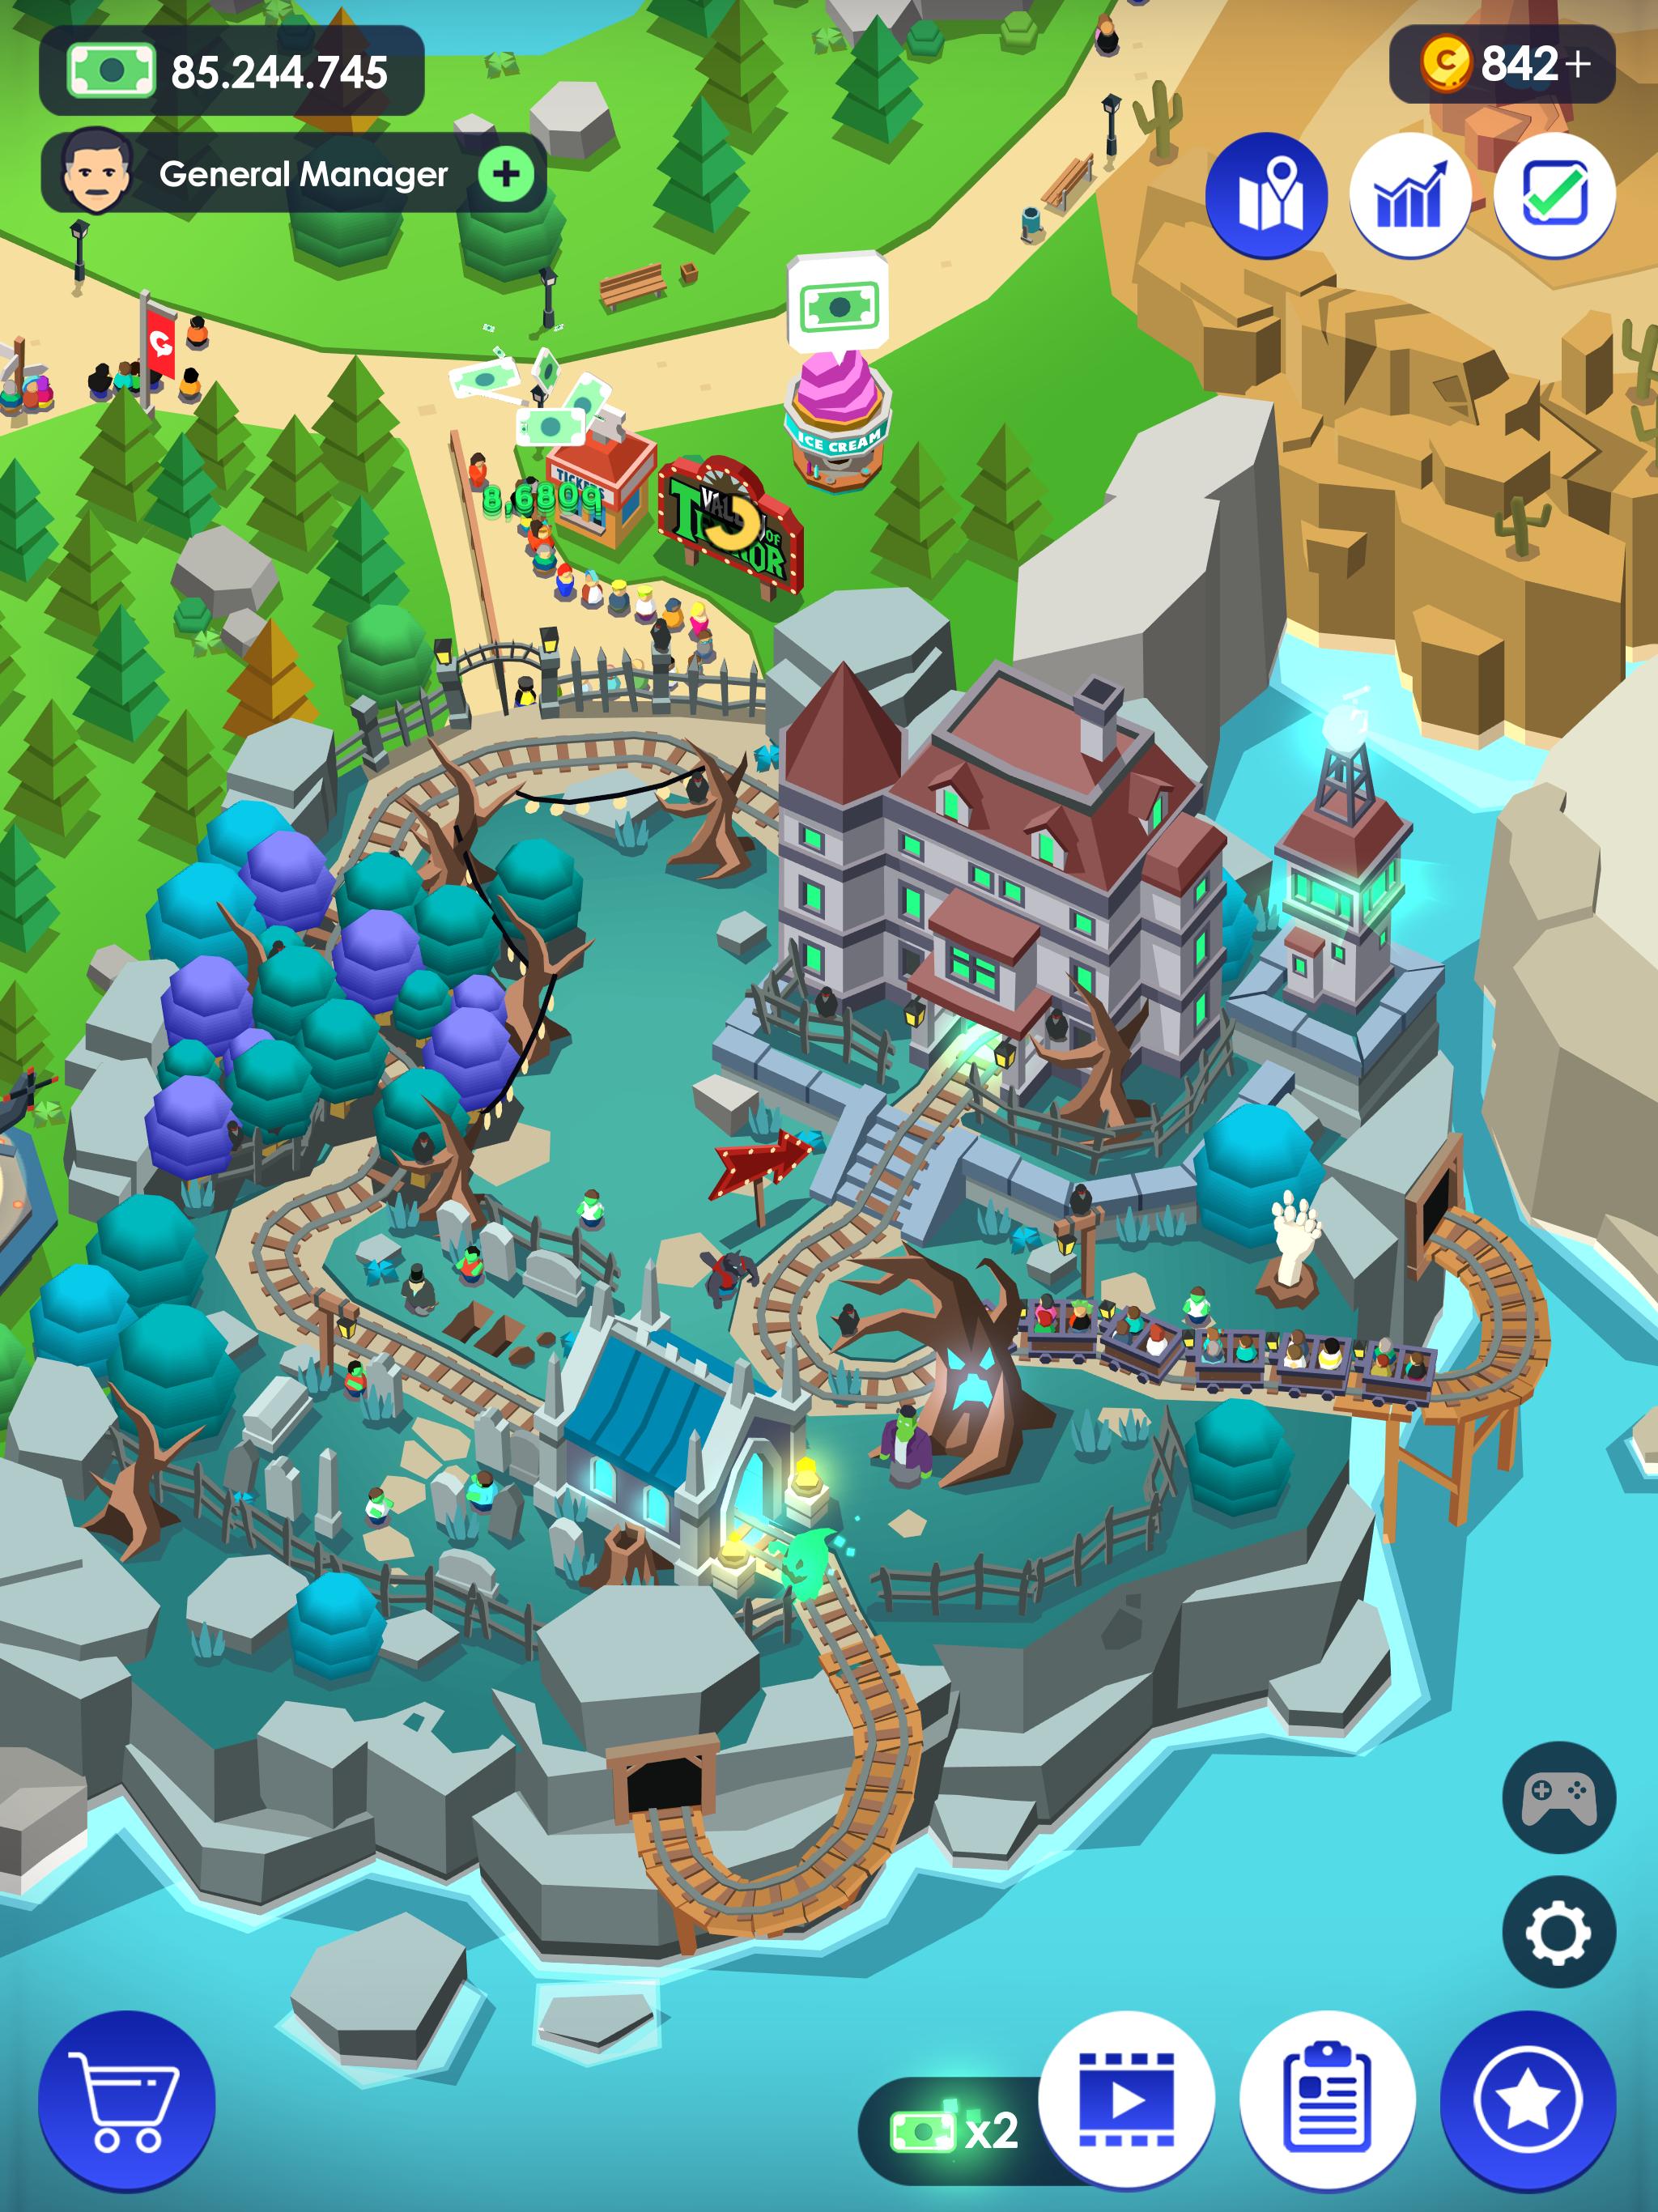 Idle Theme Park Tycoon Juego De Parque Temático For - #U0441#U043a#U0430#U0447#U0430#U0442#U044c roblox theme park tycoon 2 how to unlock the to the